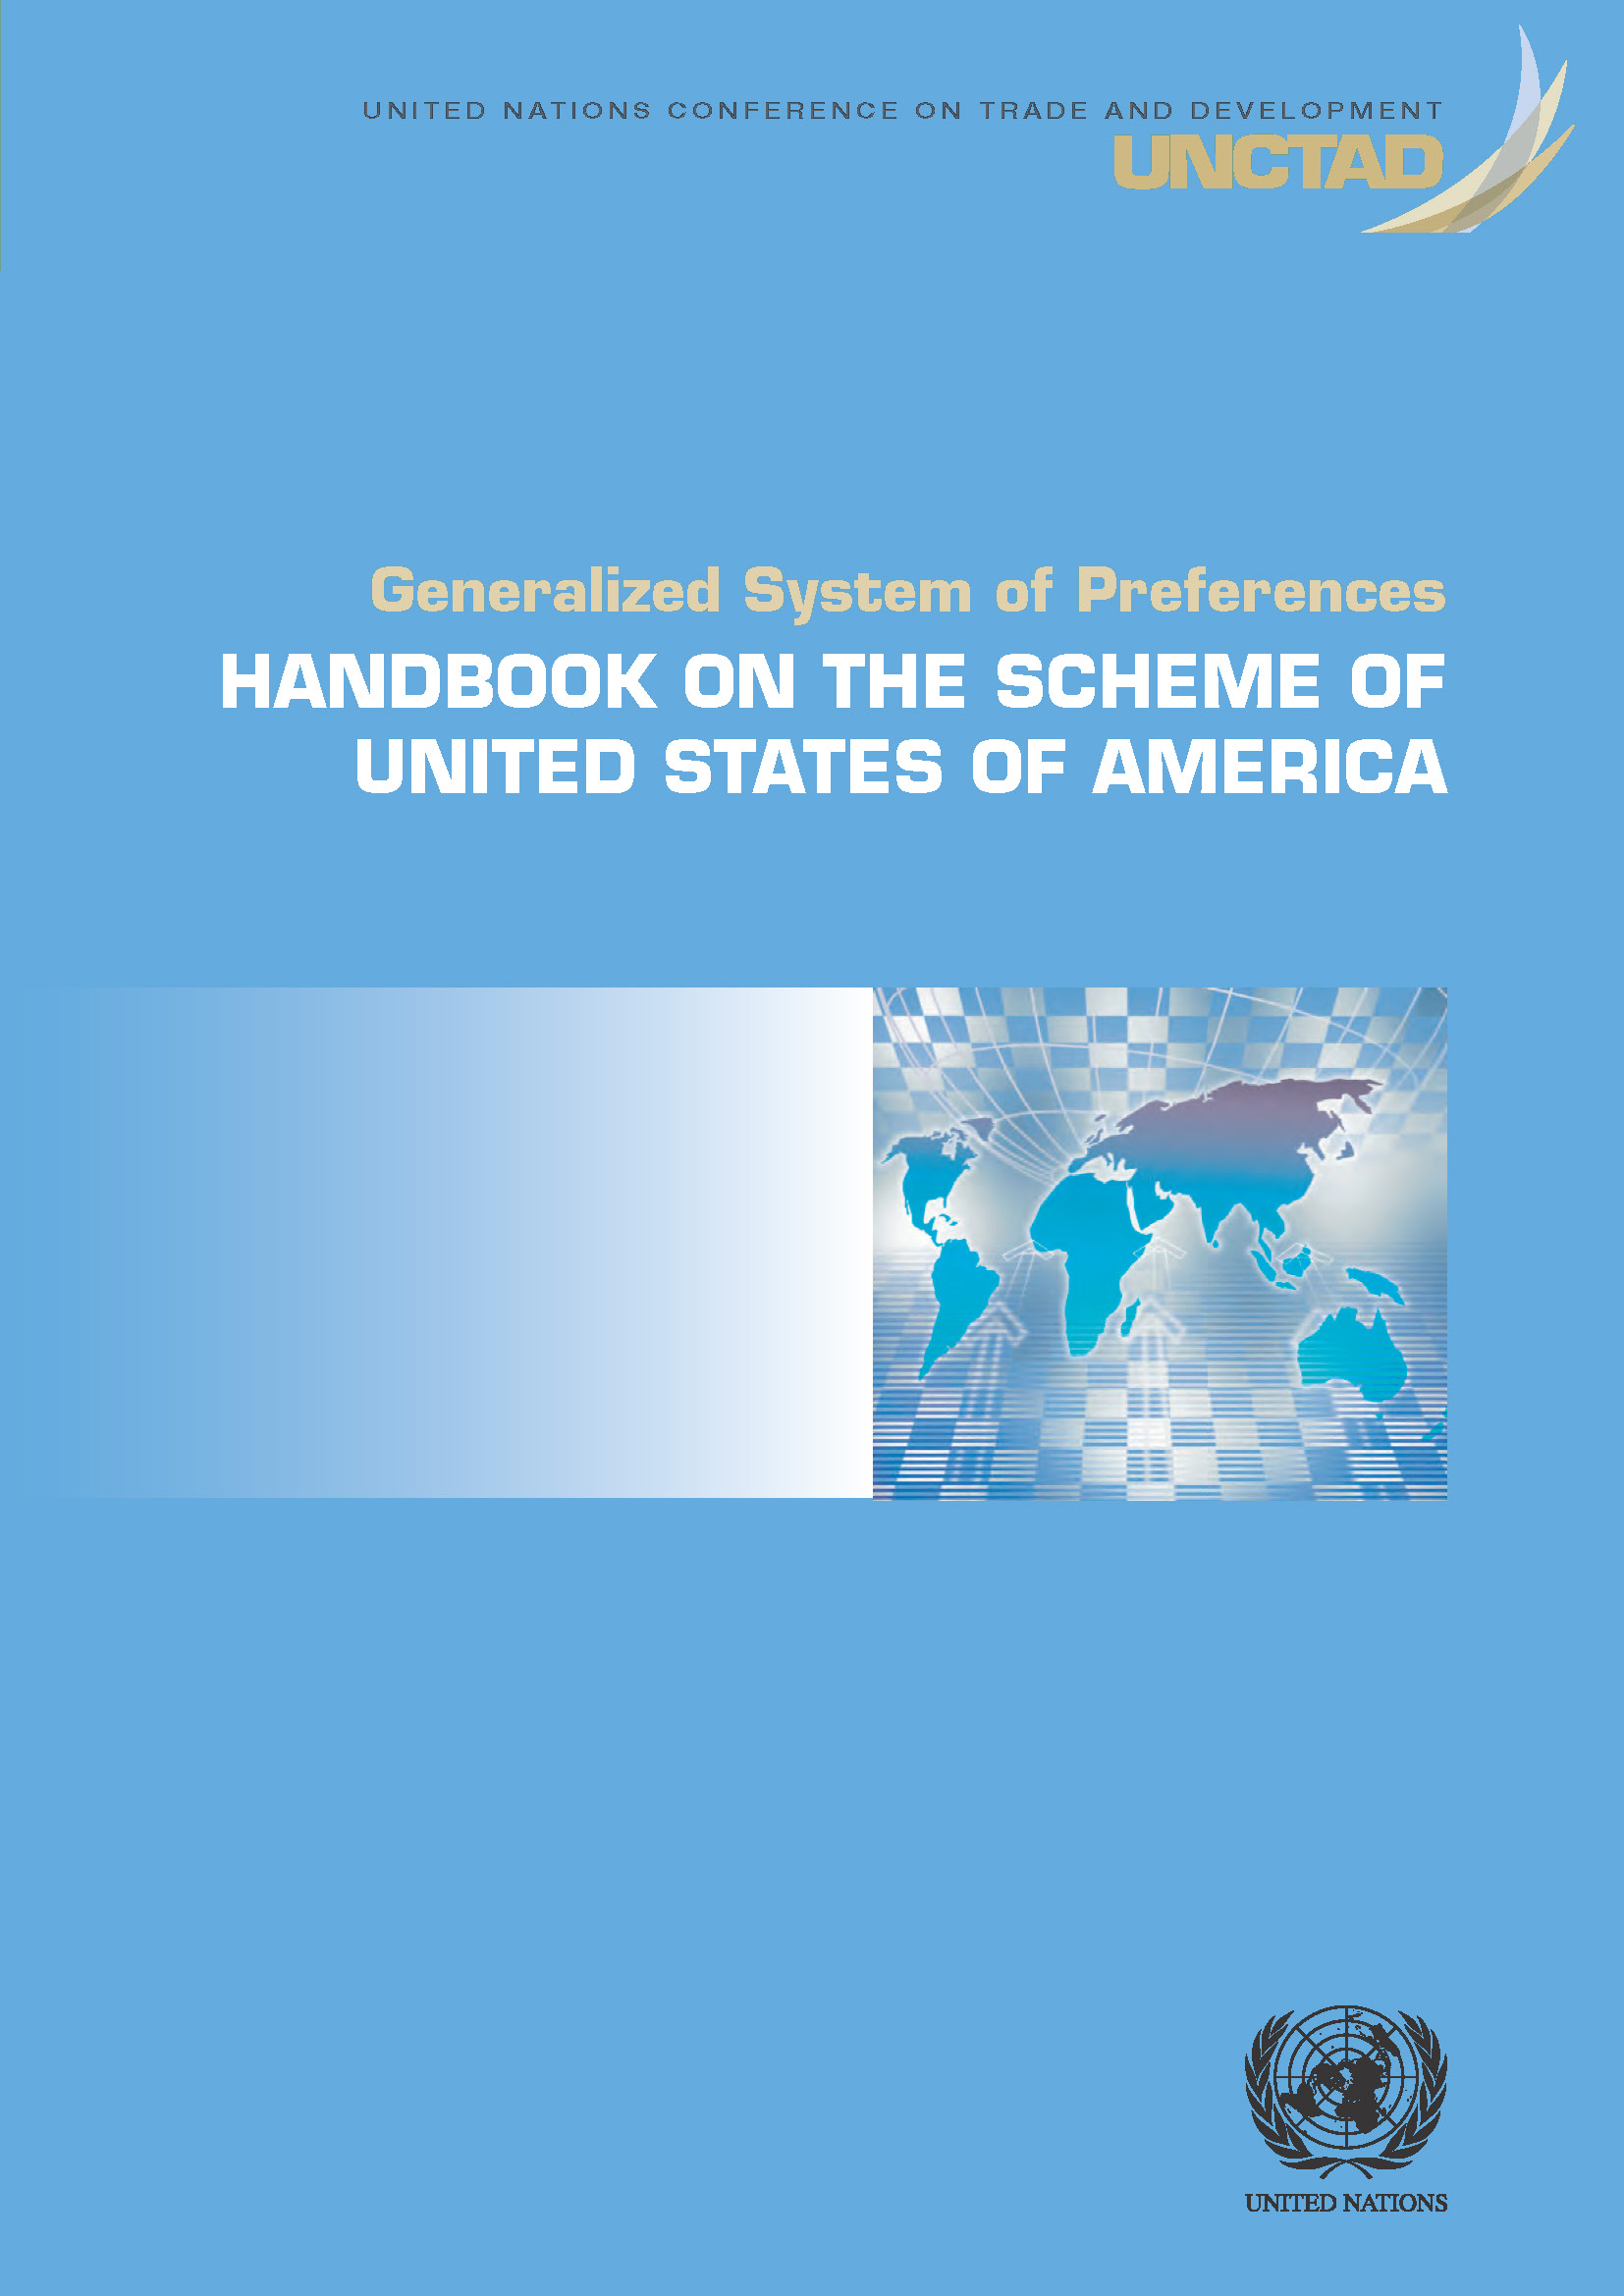 GSP Handbook on the Scheme of the United States of America